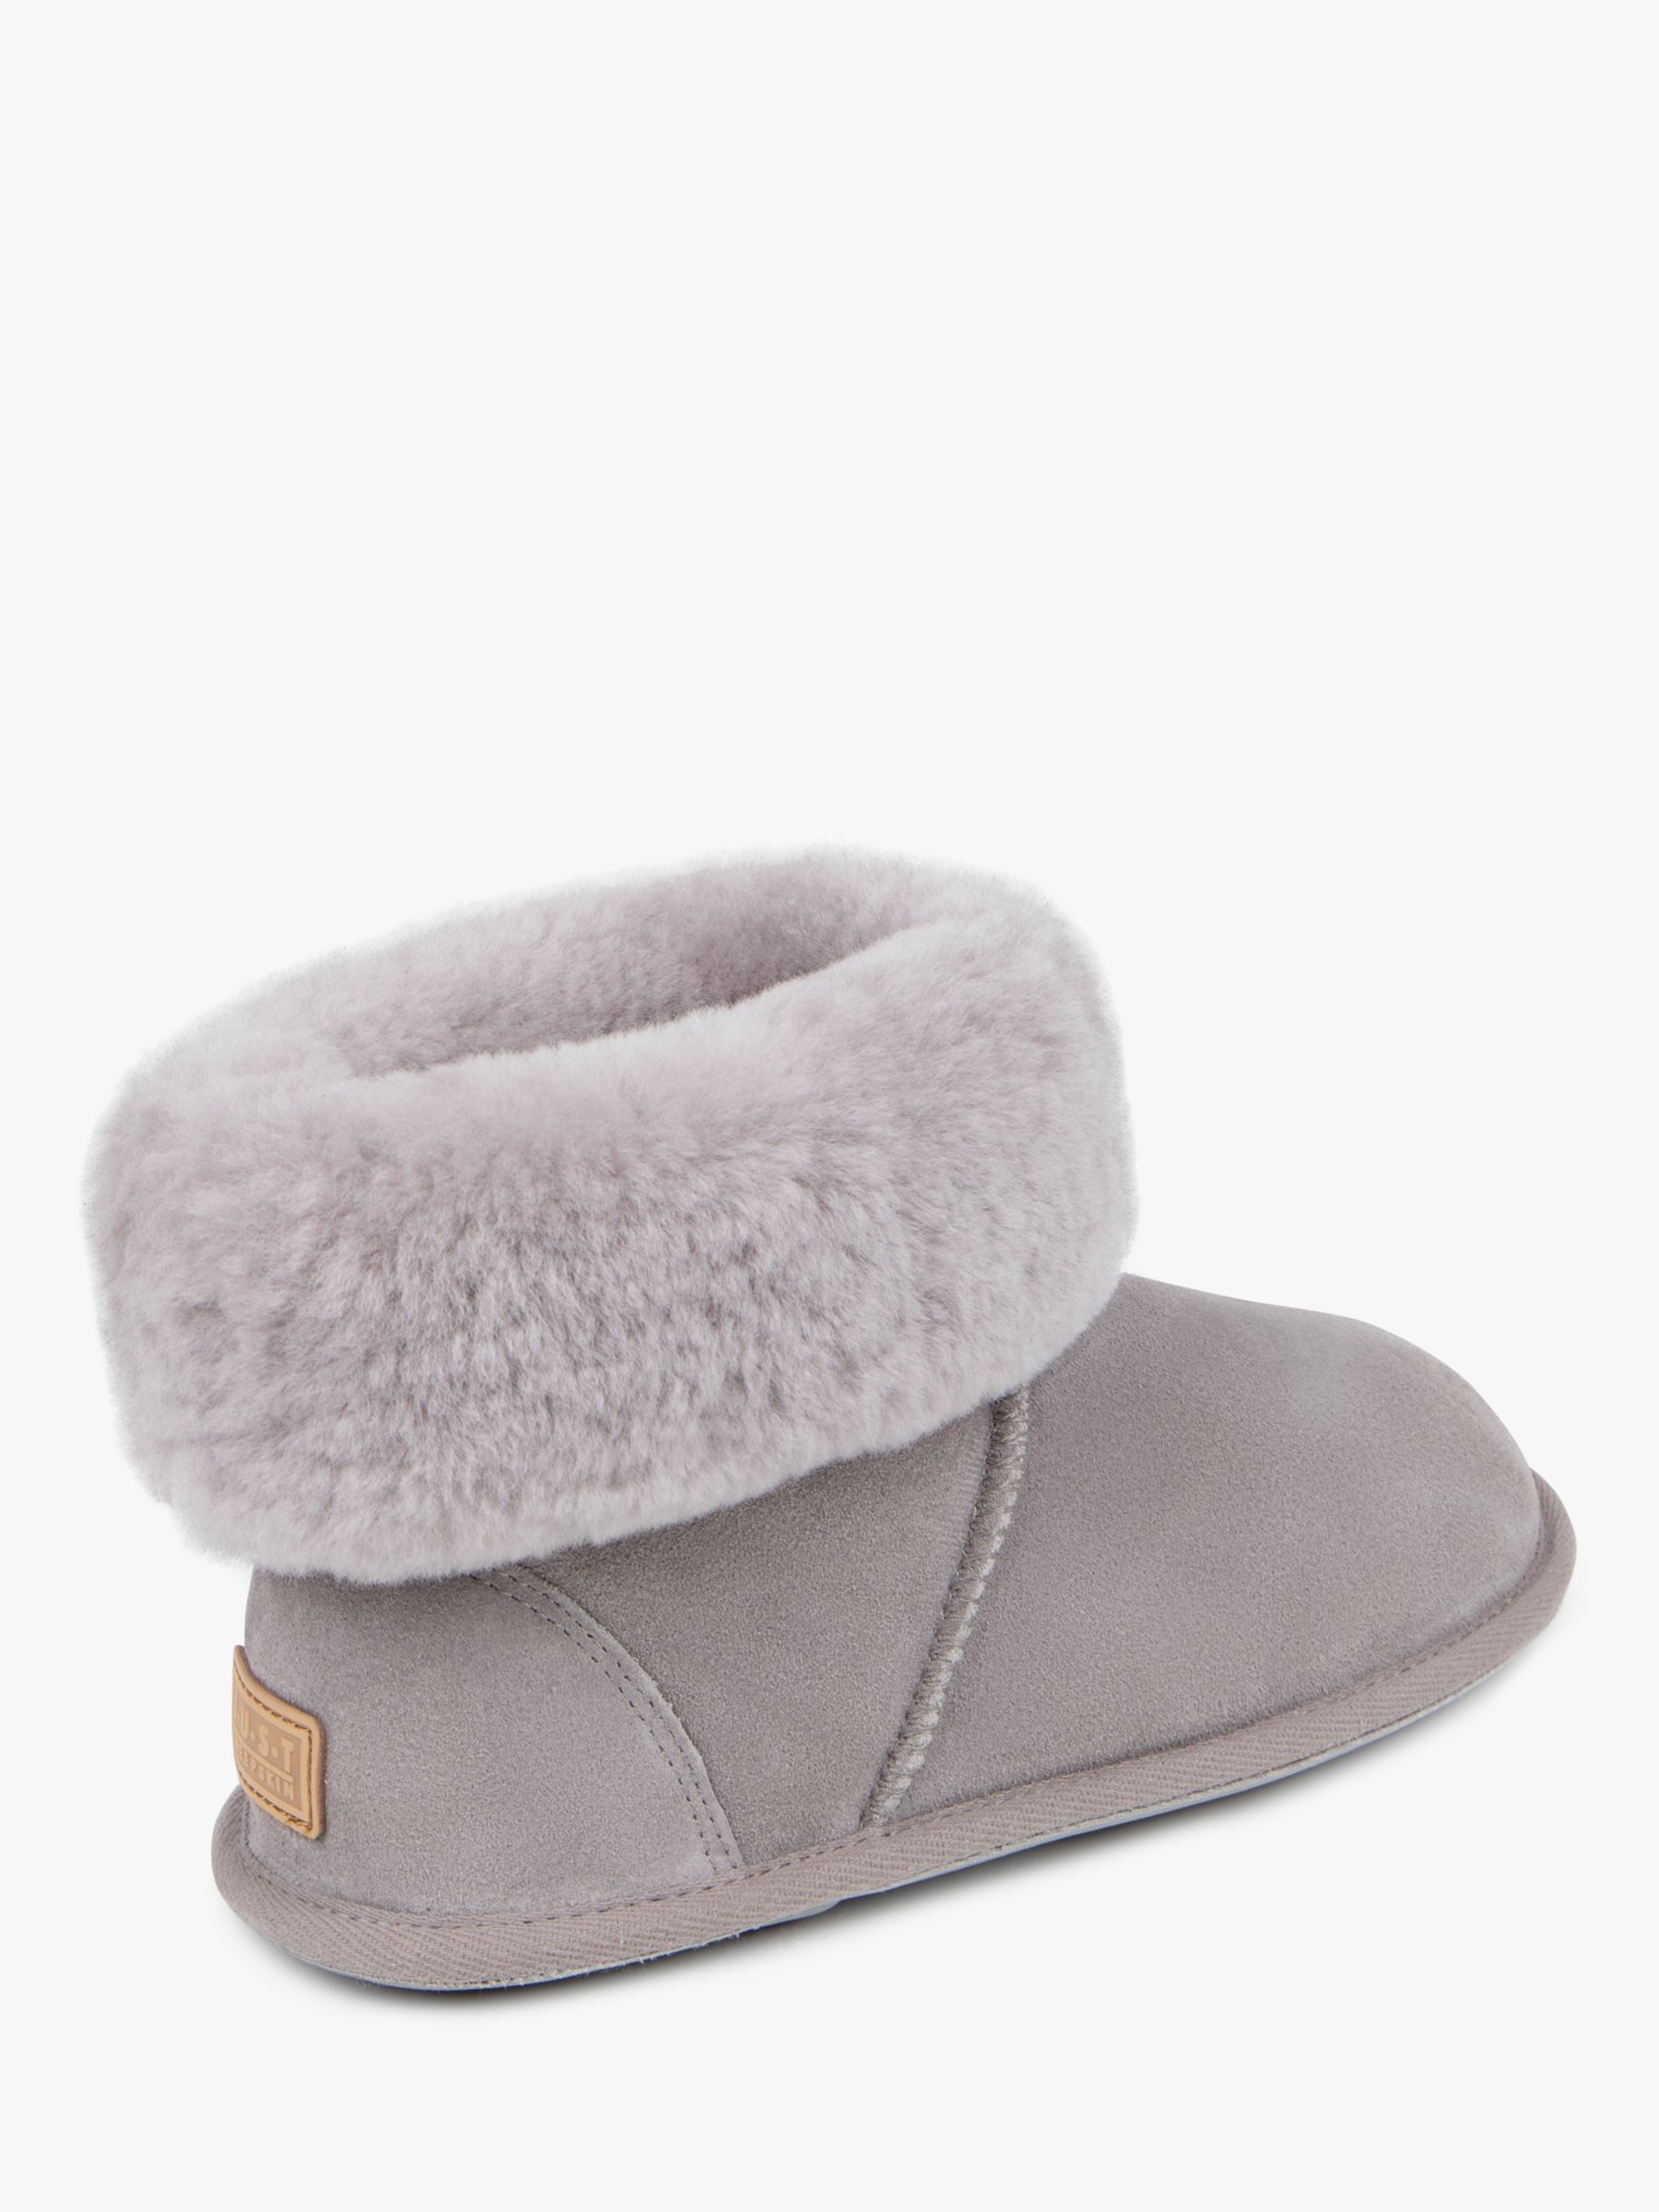 Just Sheepskin Albery Suede Slipper Boots, Light Grey at John Lewis ...